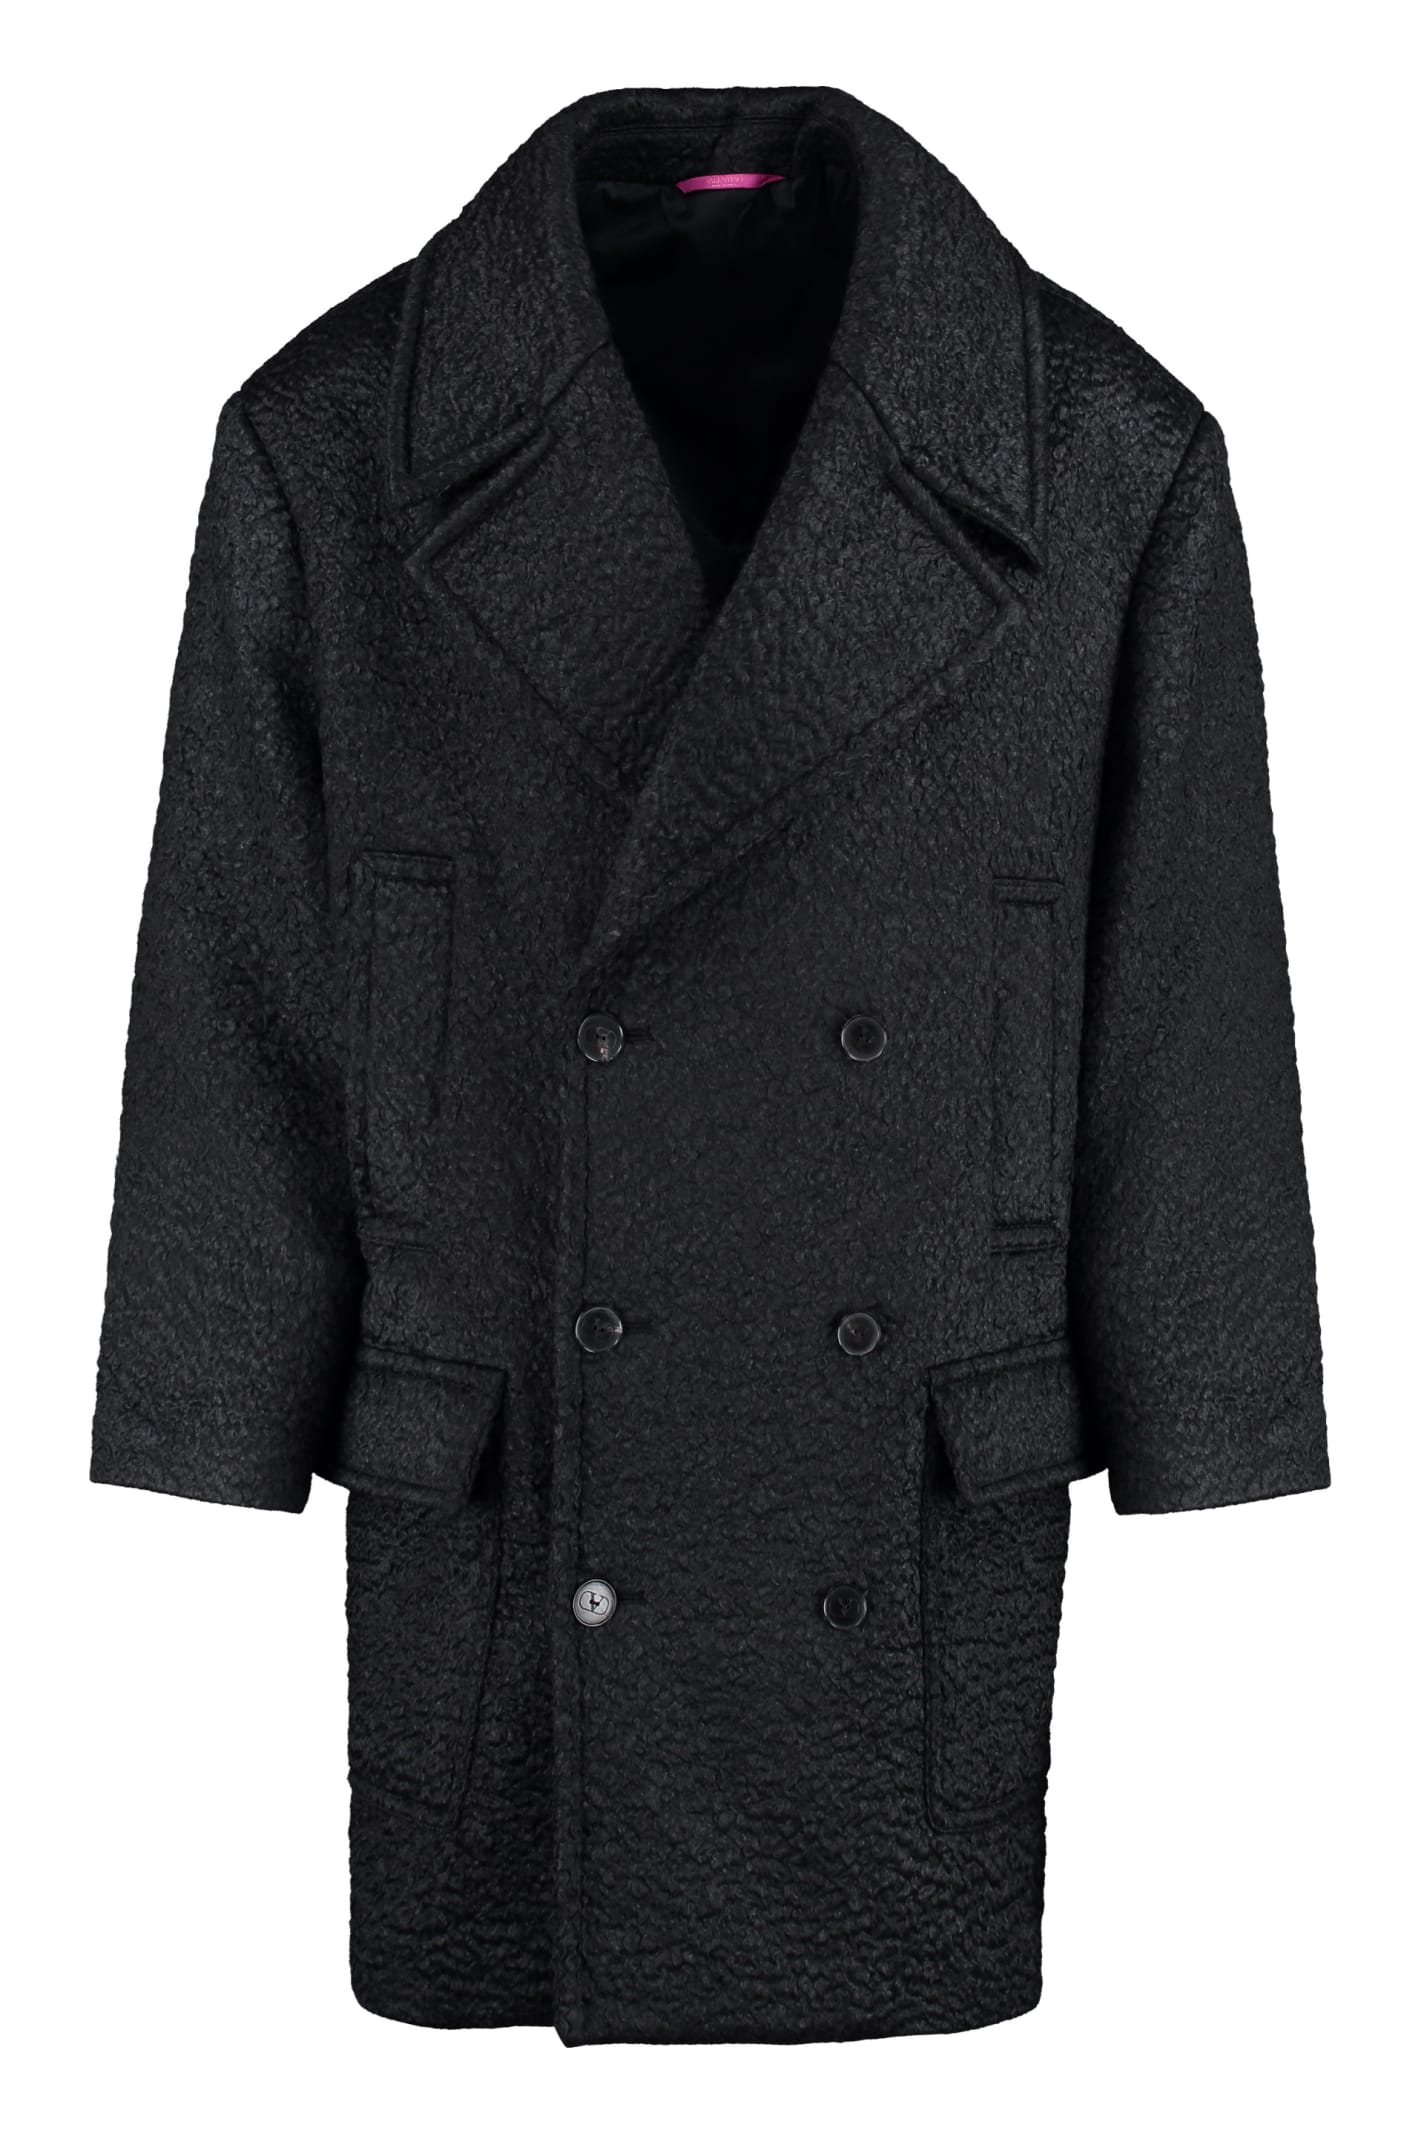 Valentino Wool Blend Double-breasted Coat